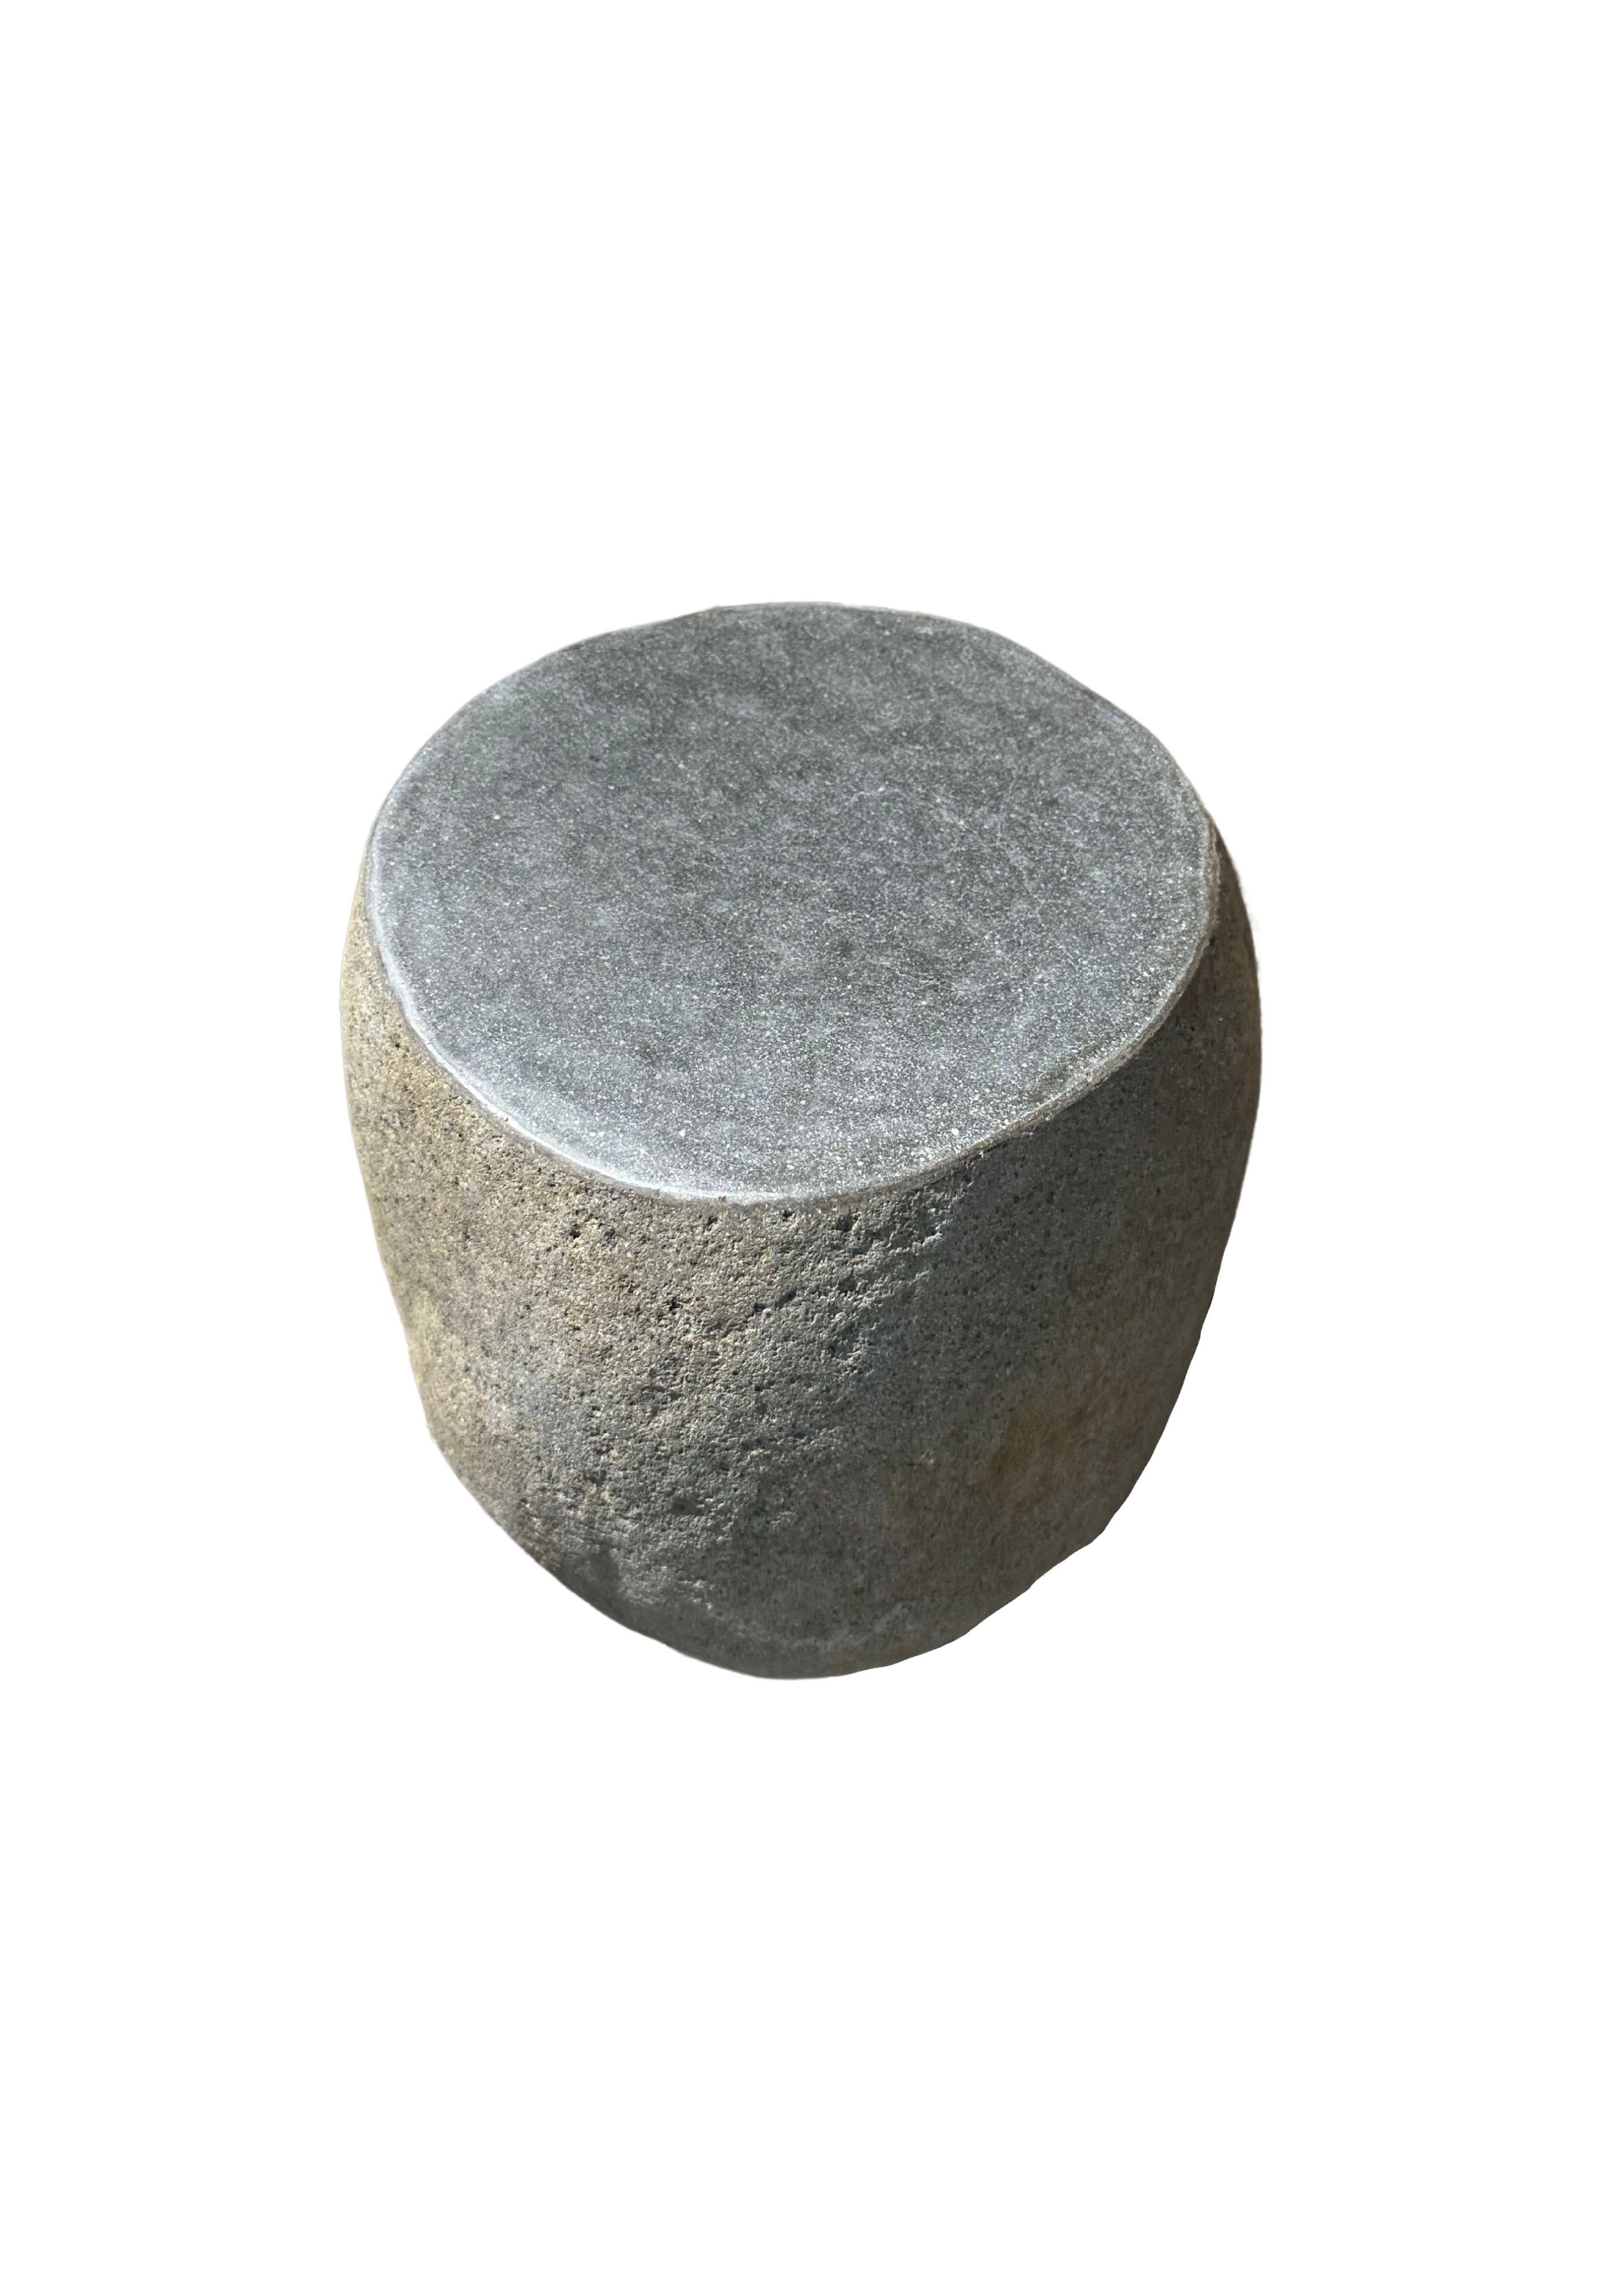 Indonesian Solid Stone Side Table / Pedestal from Java, Indonesia